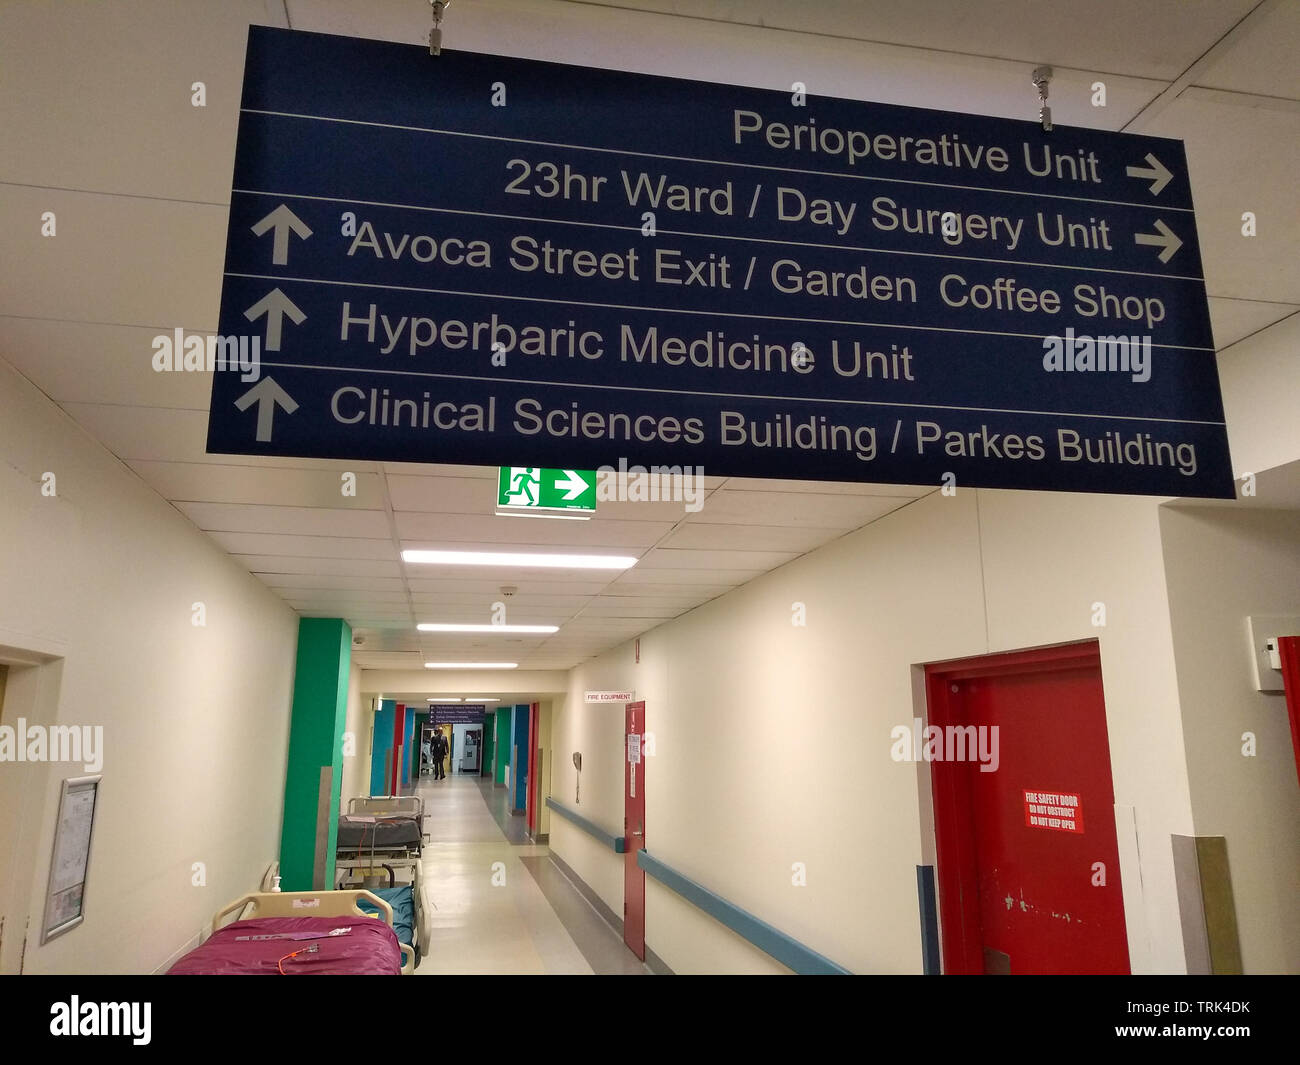 perioperative unit sign and 23h ward directions in a hospital in Sydney Australia Stock Photo